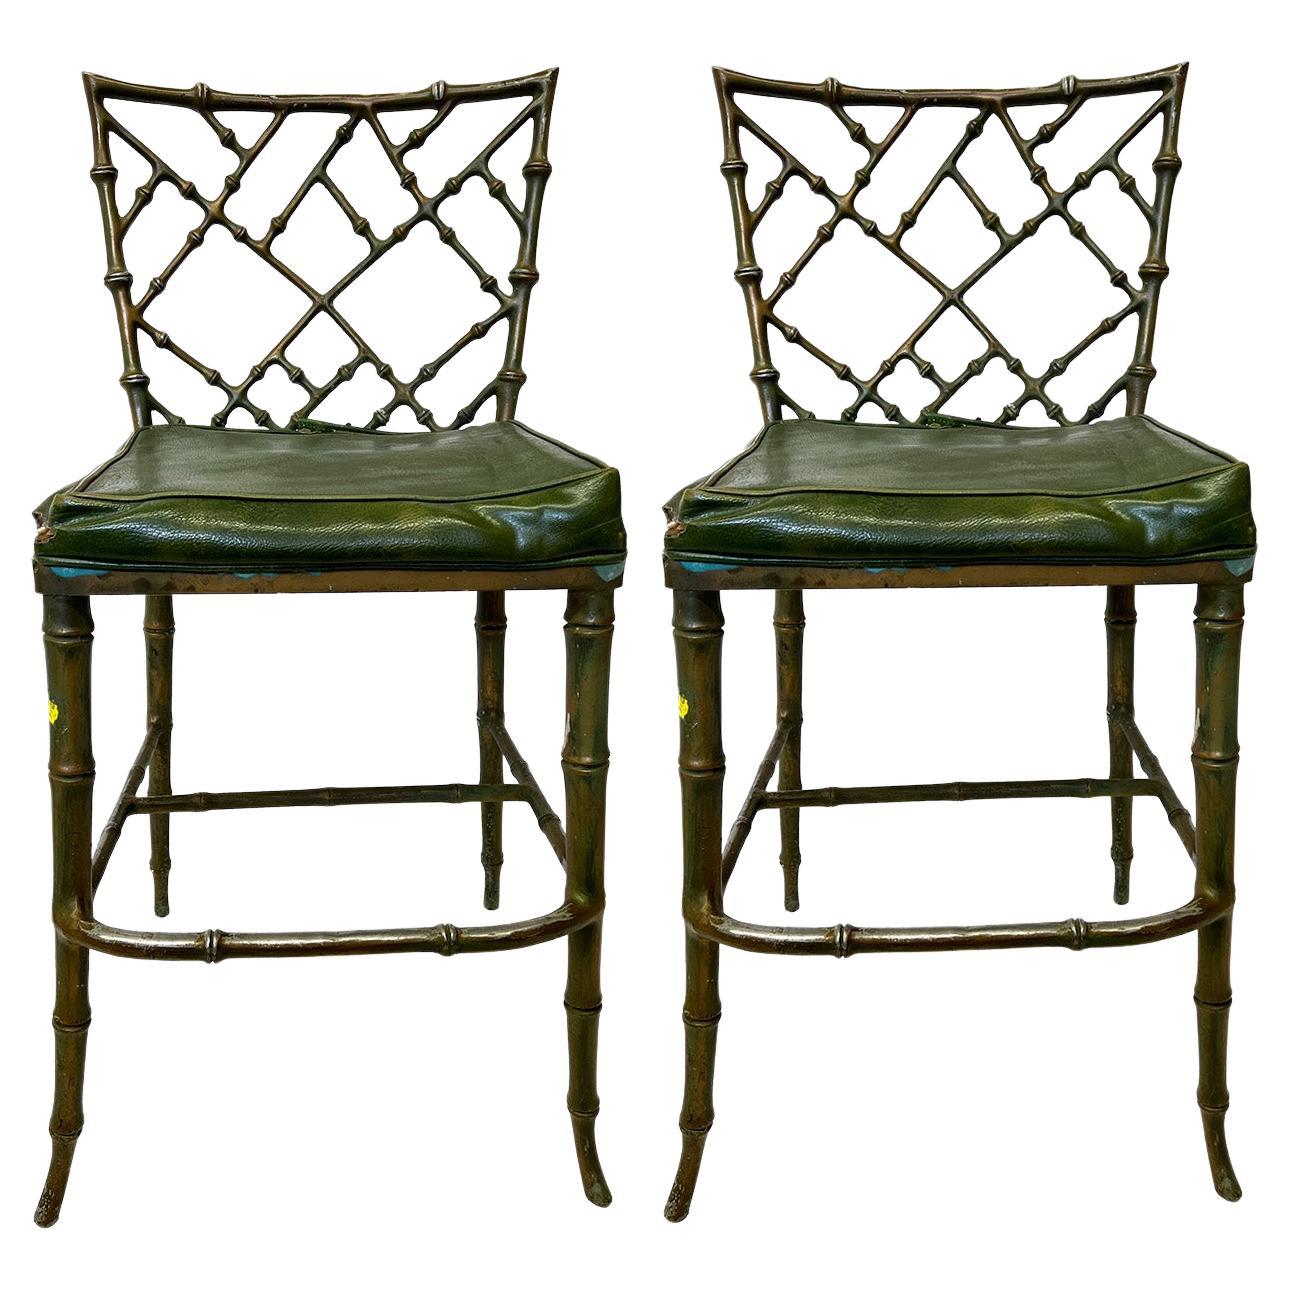 Pair of Faux Bamboo Metal Frame Chair Stools